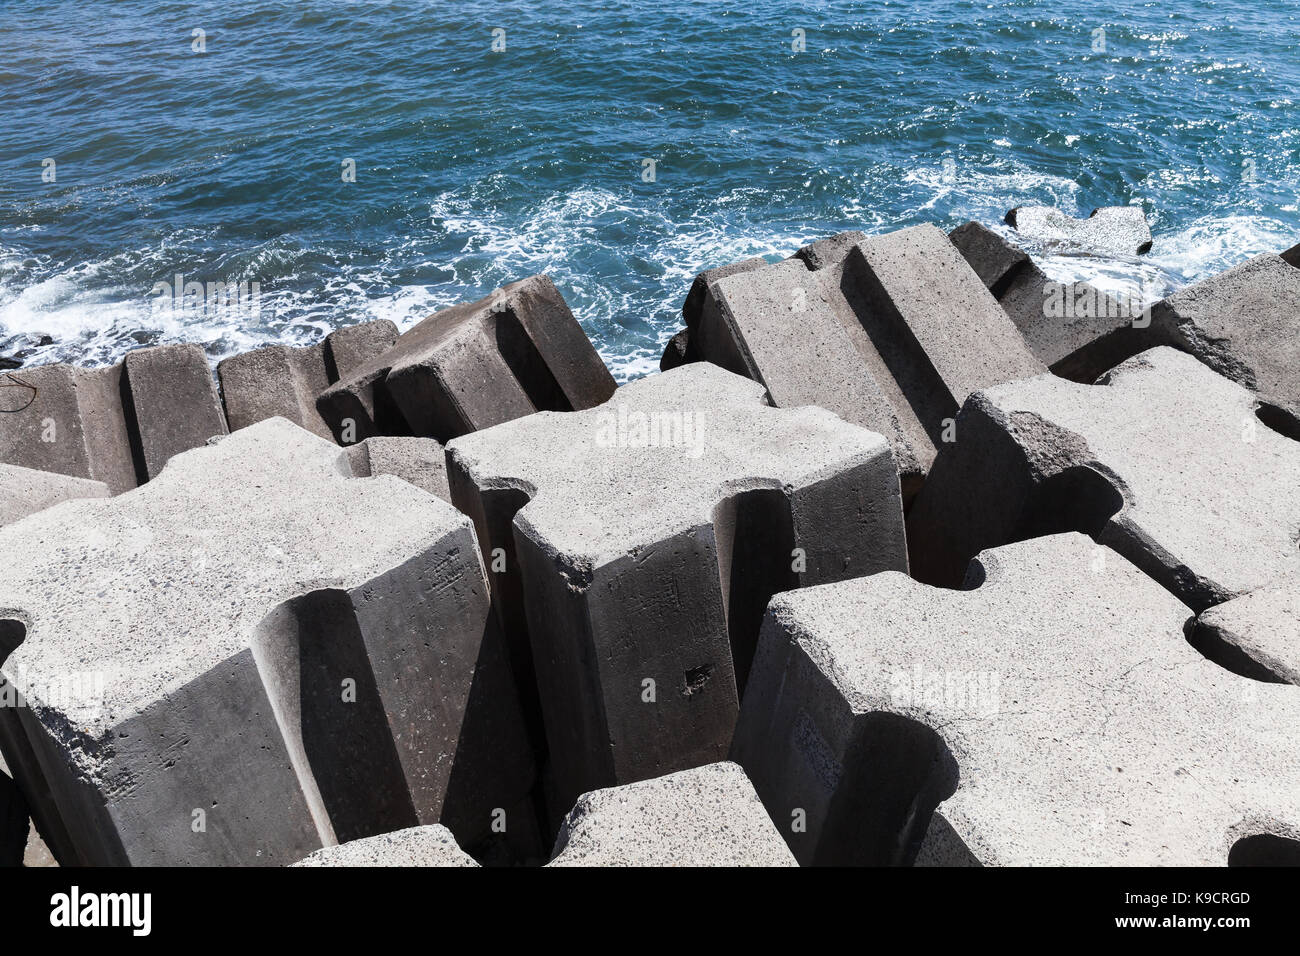 Rough concrete blocks as a part of breakwater structure for protection from ocean storm waves Stock Photo